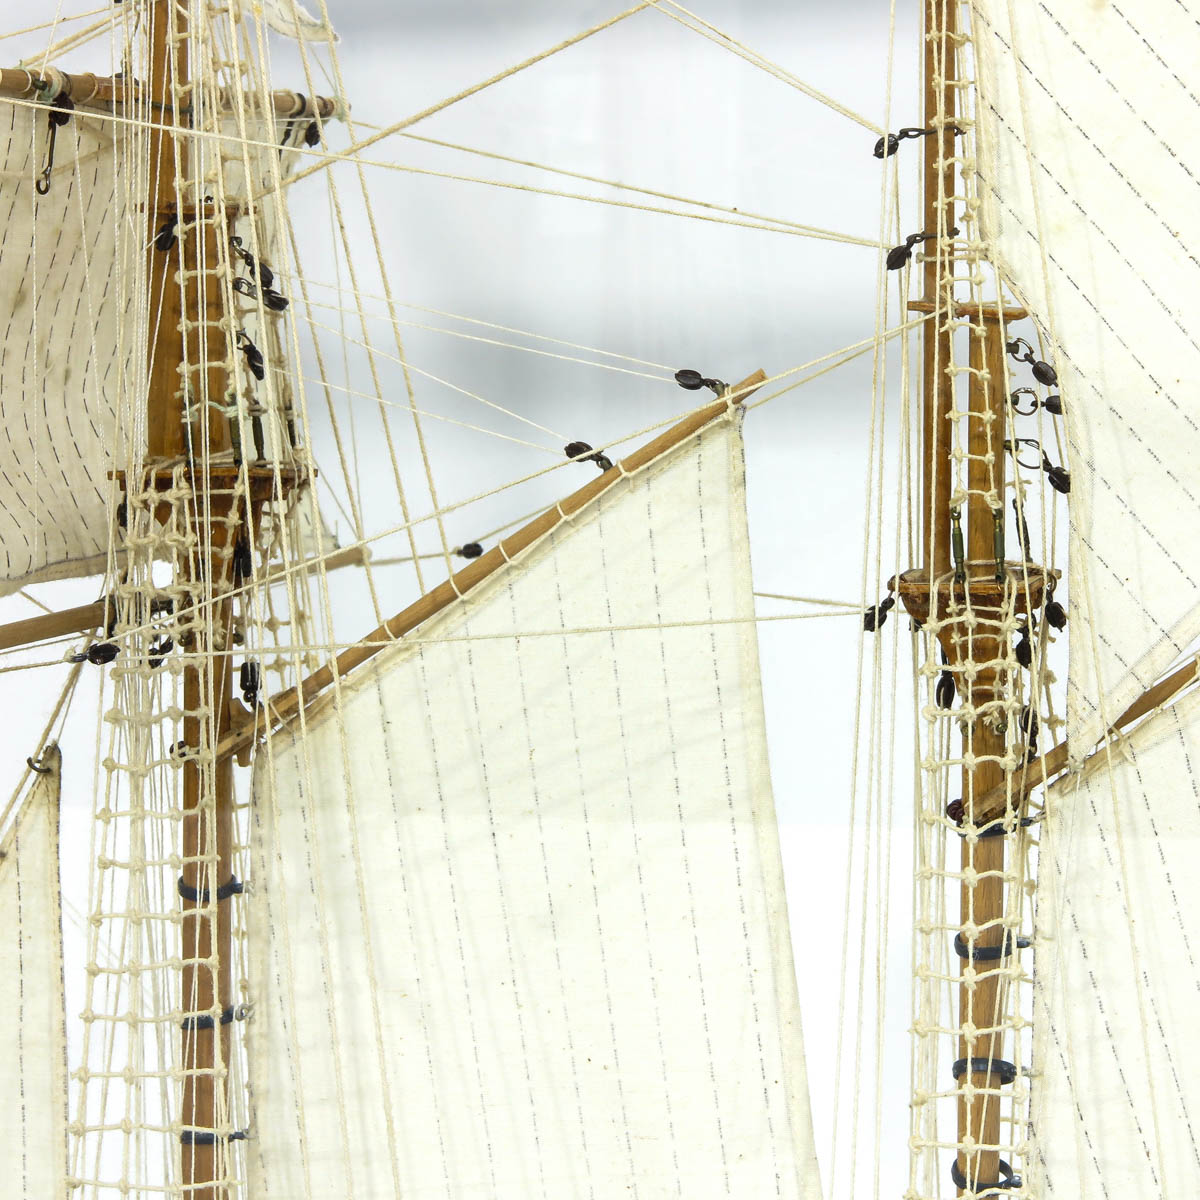 A Model Ship - Image 9 of 10